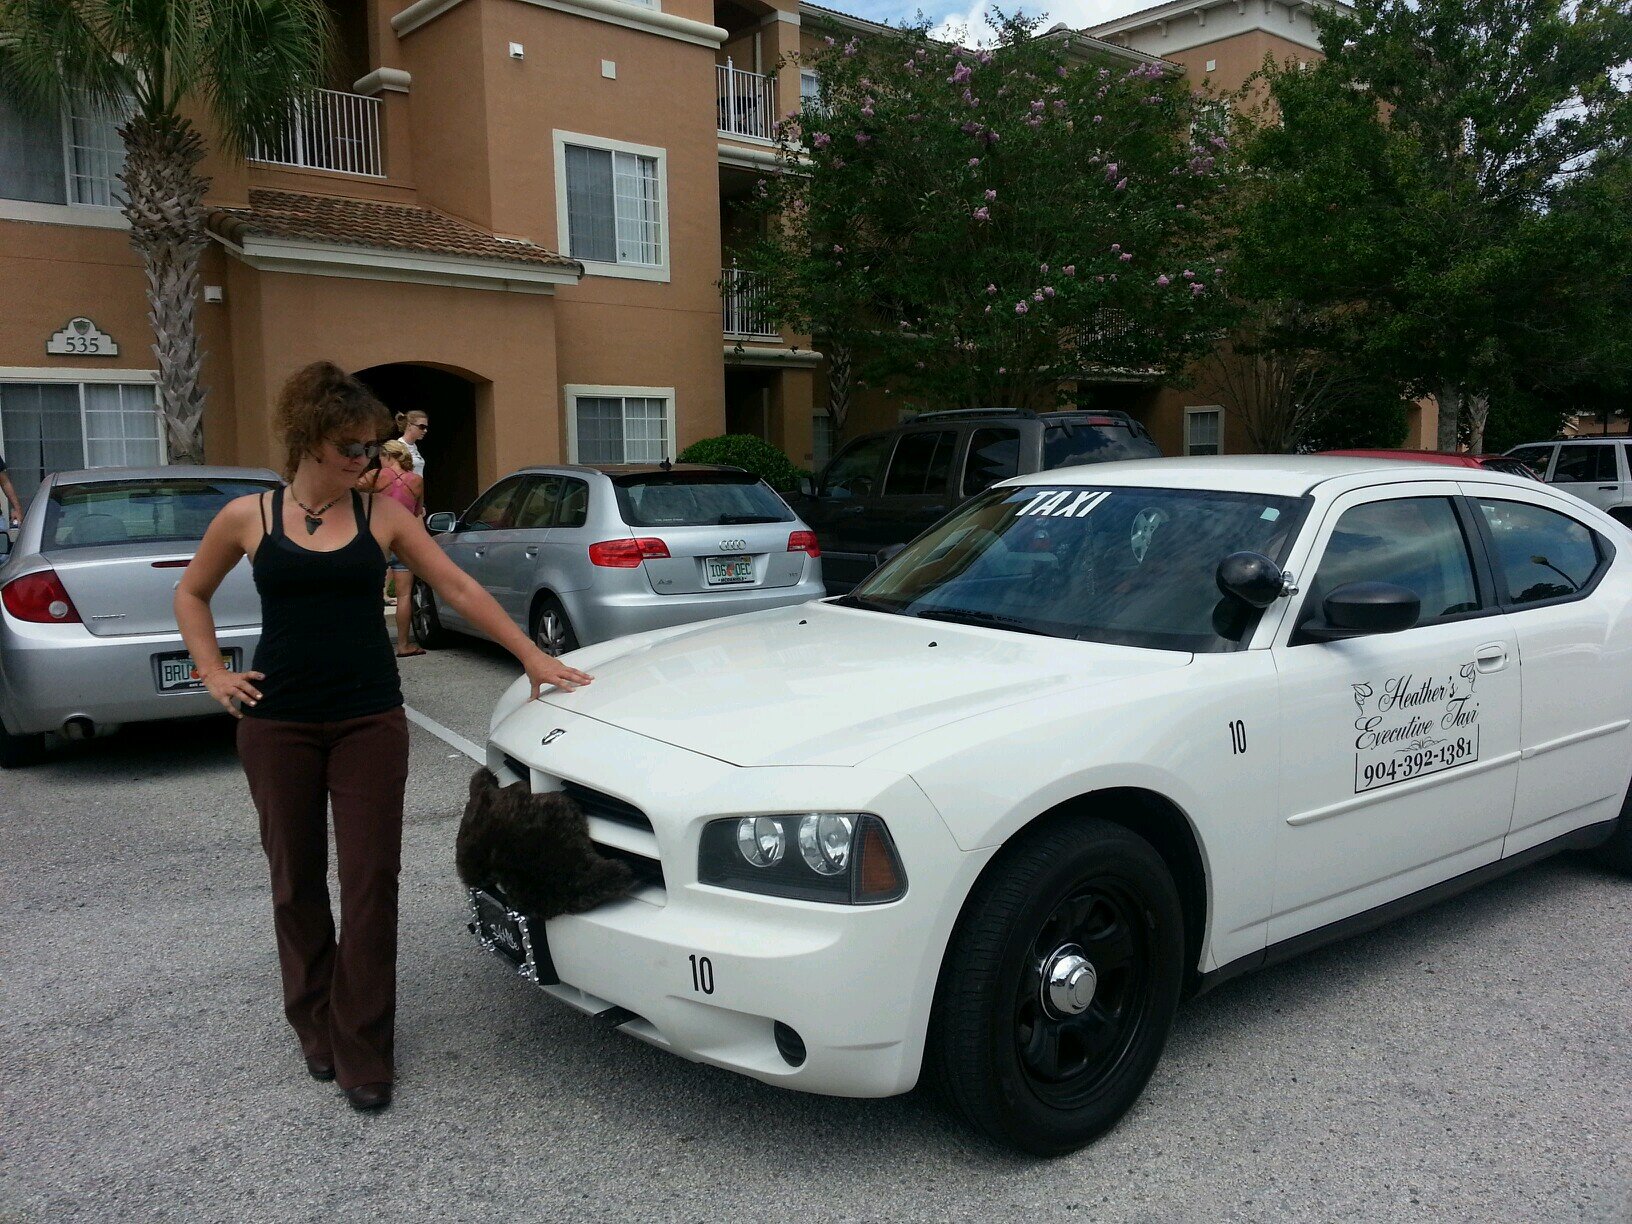 Classy Taxi Service in St Augustine Florida the oldest city in America!